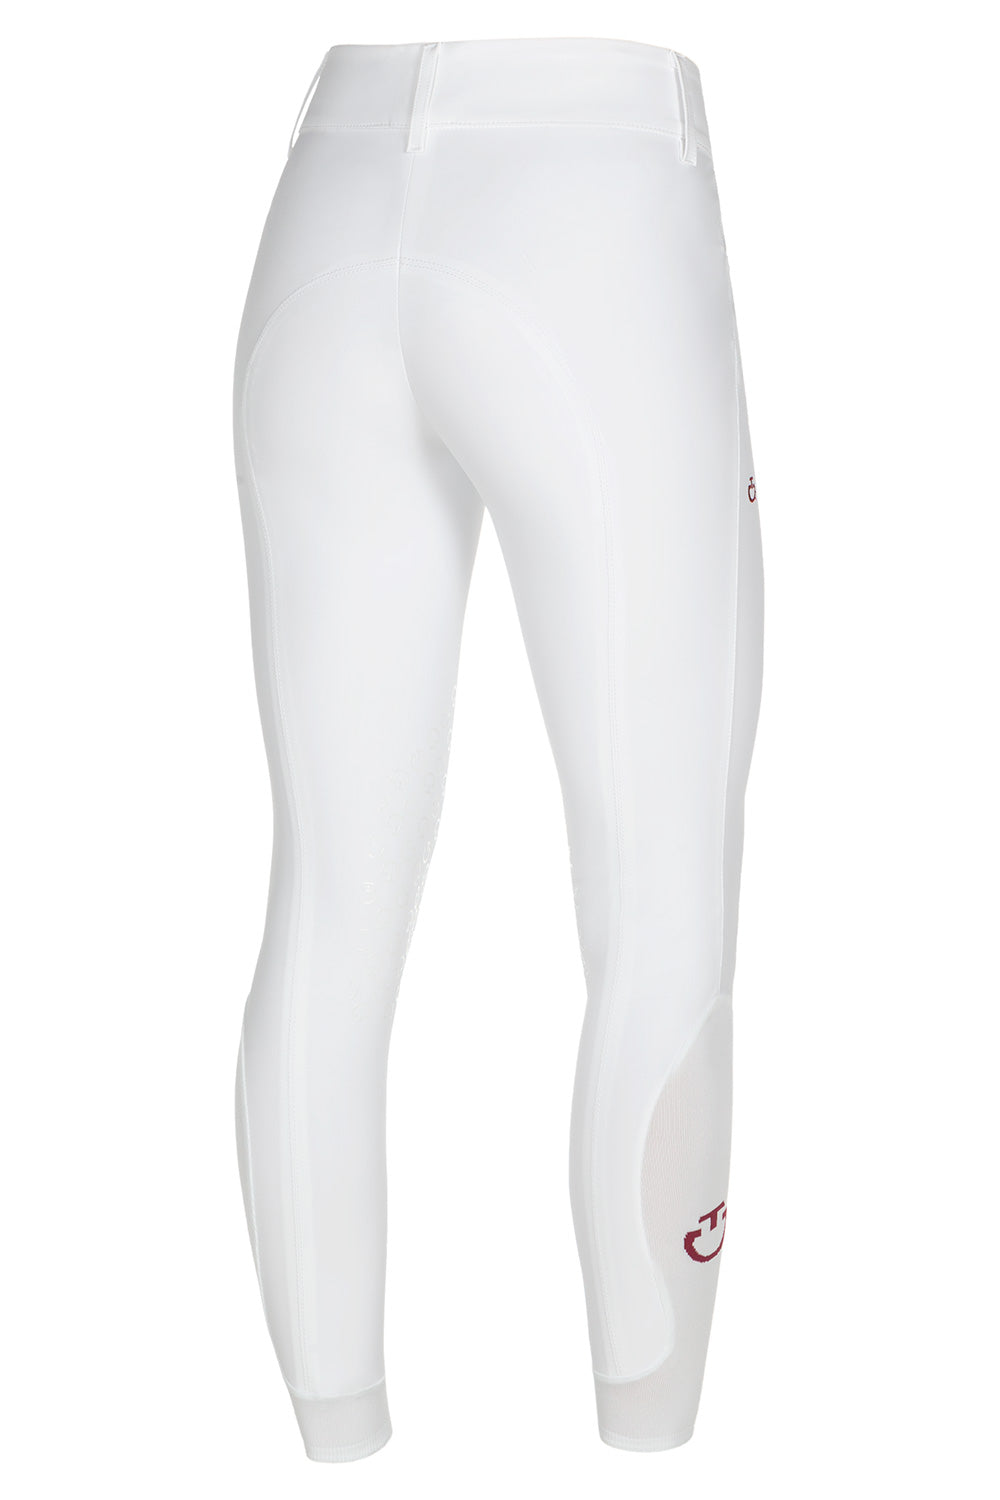 The Cavalleria Toscana American breeches encapsulates everything CT has to offer. The gorgeous knitted fabric is extremely comfortable and stretchy whilst elegant. The wider waistband gives a modern updates look.  These American breeches come with the iconic Cavallerria Toscana knee grip